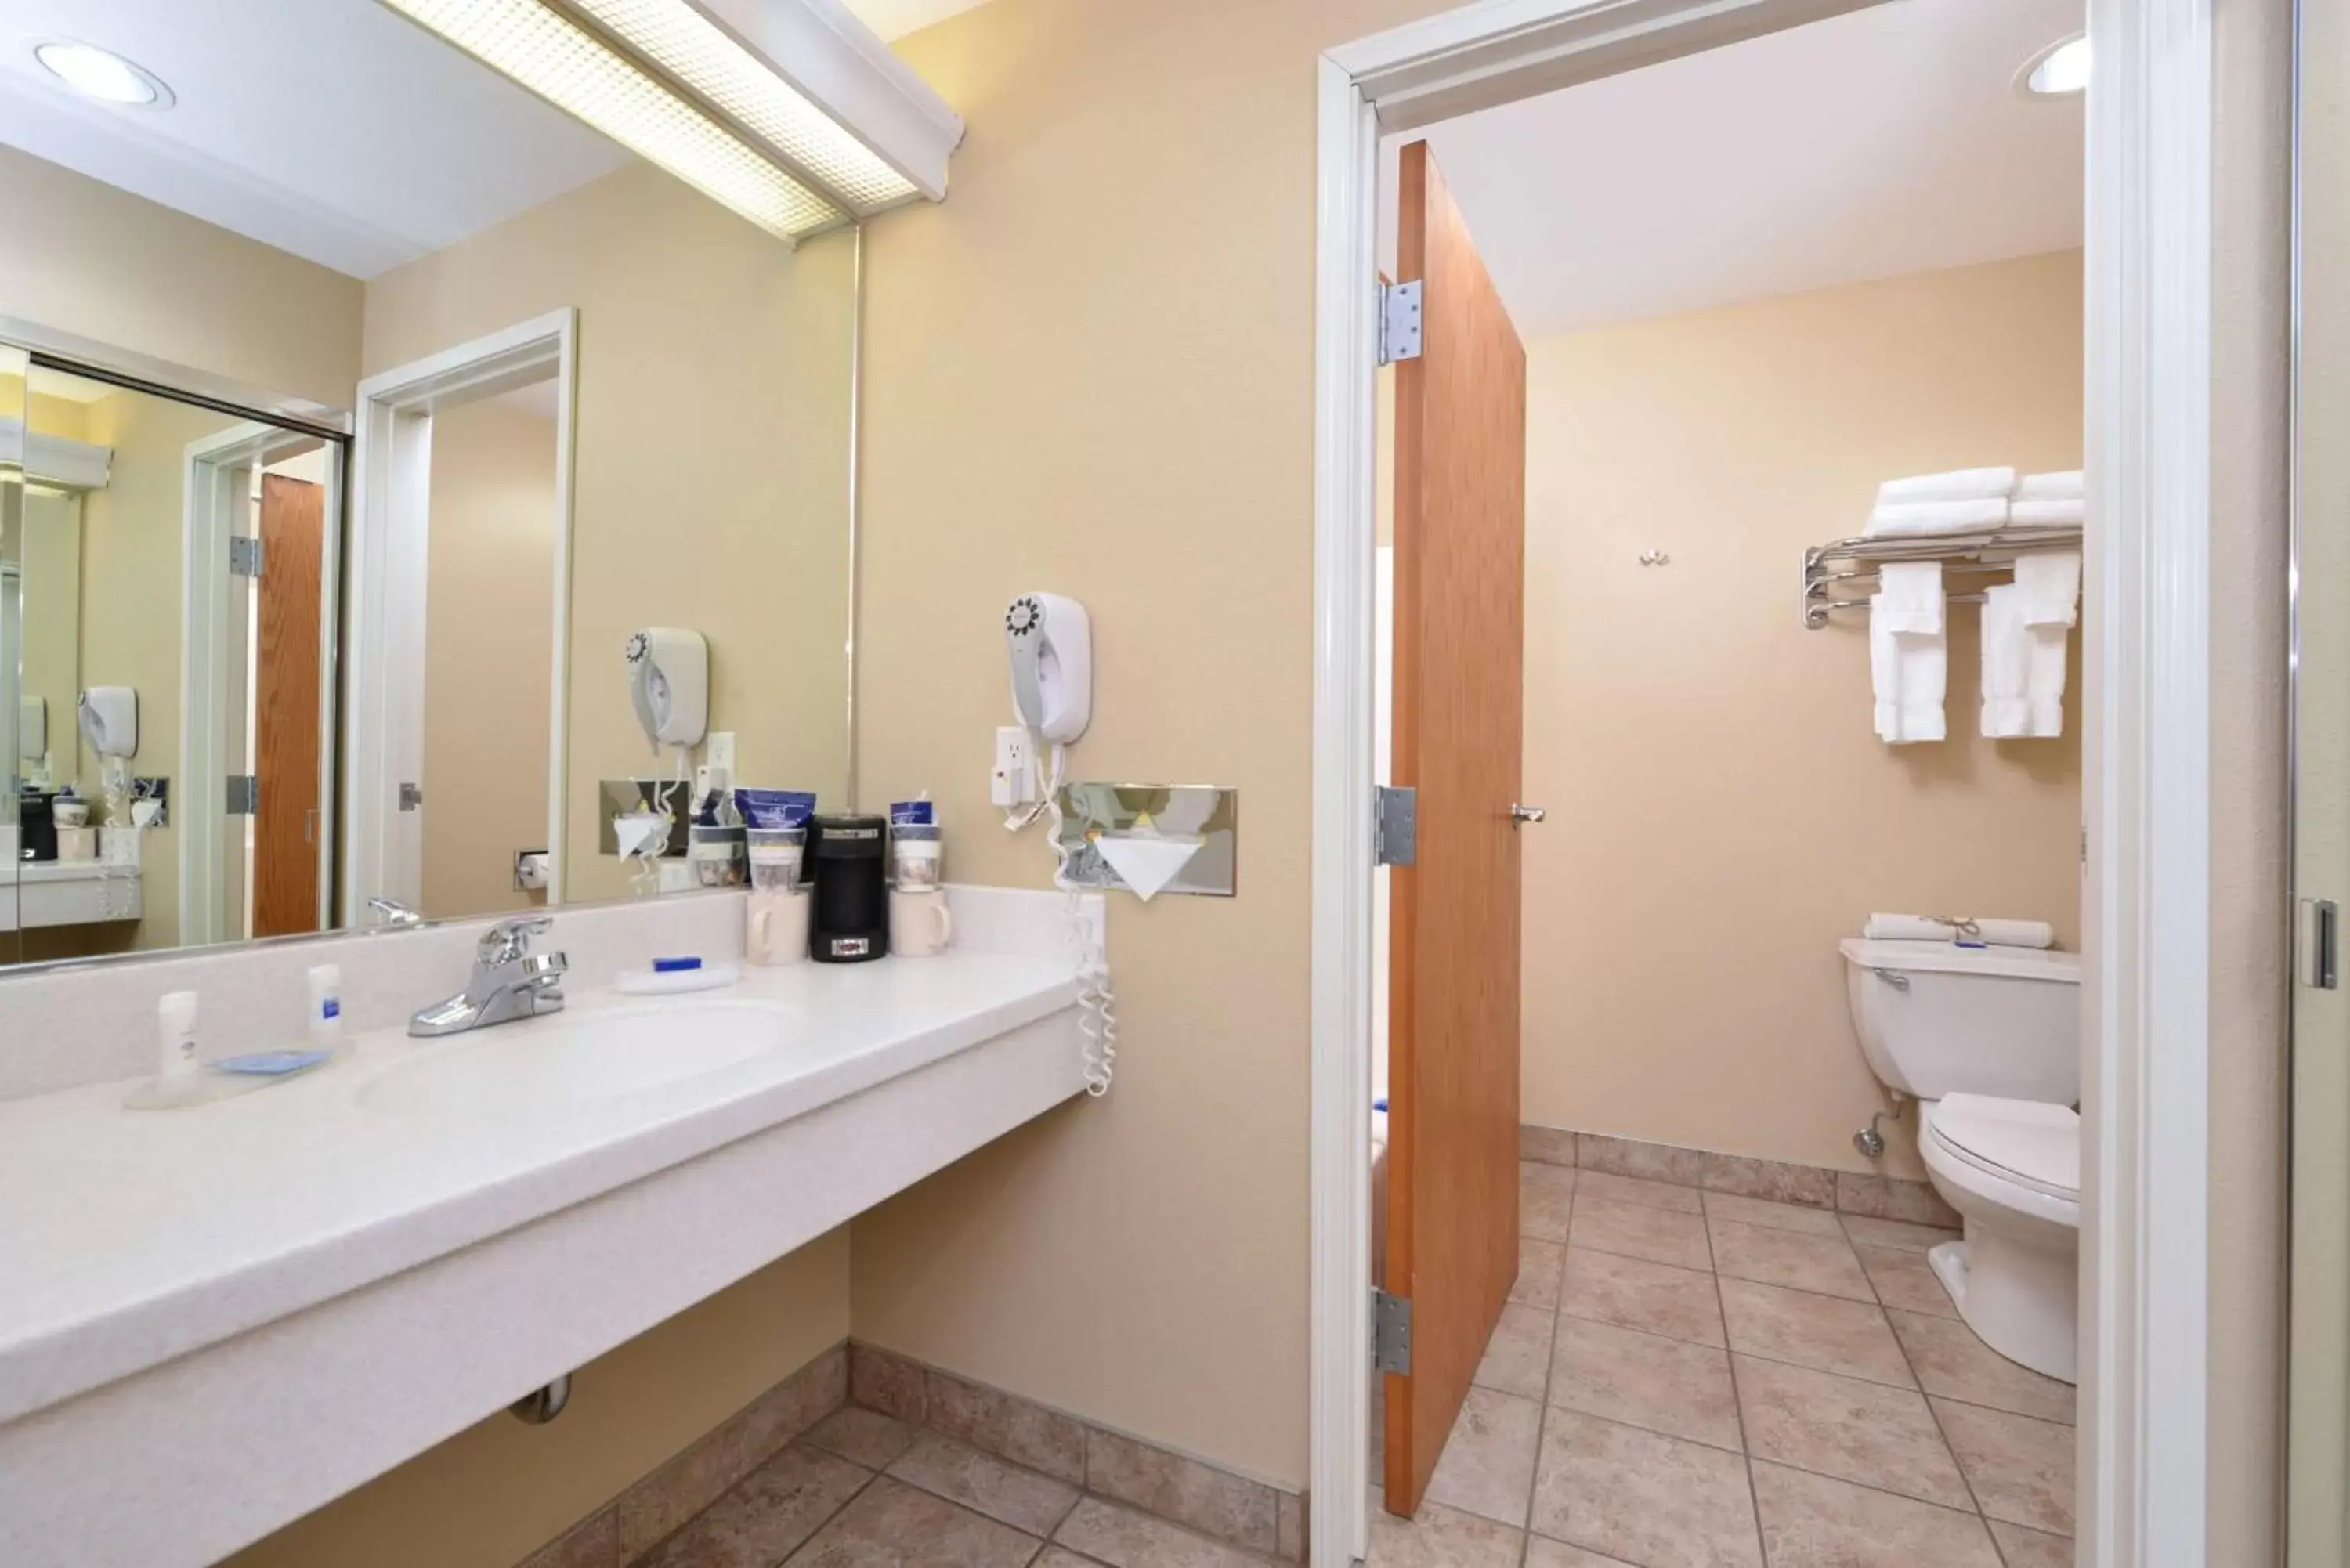 Bathroom in Best Western Lodge at River's Edge